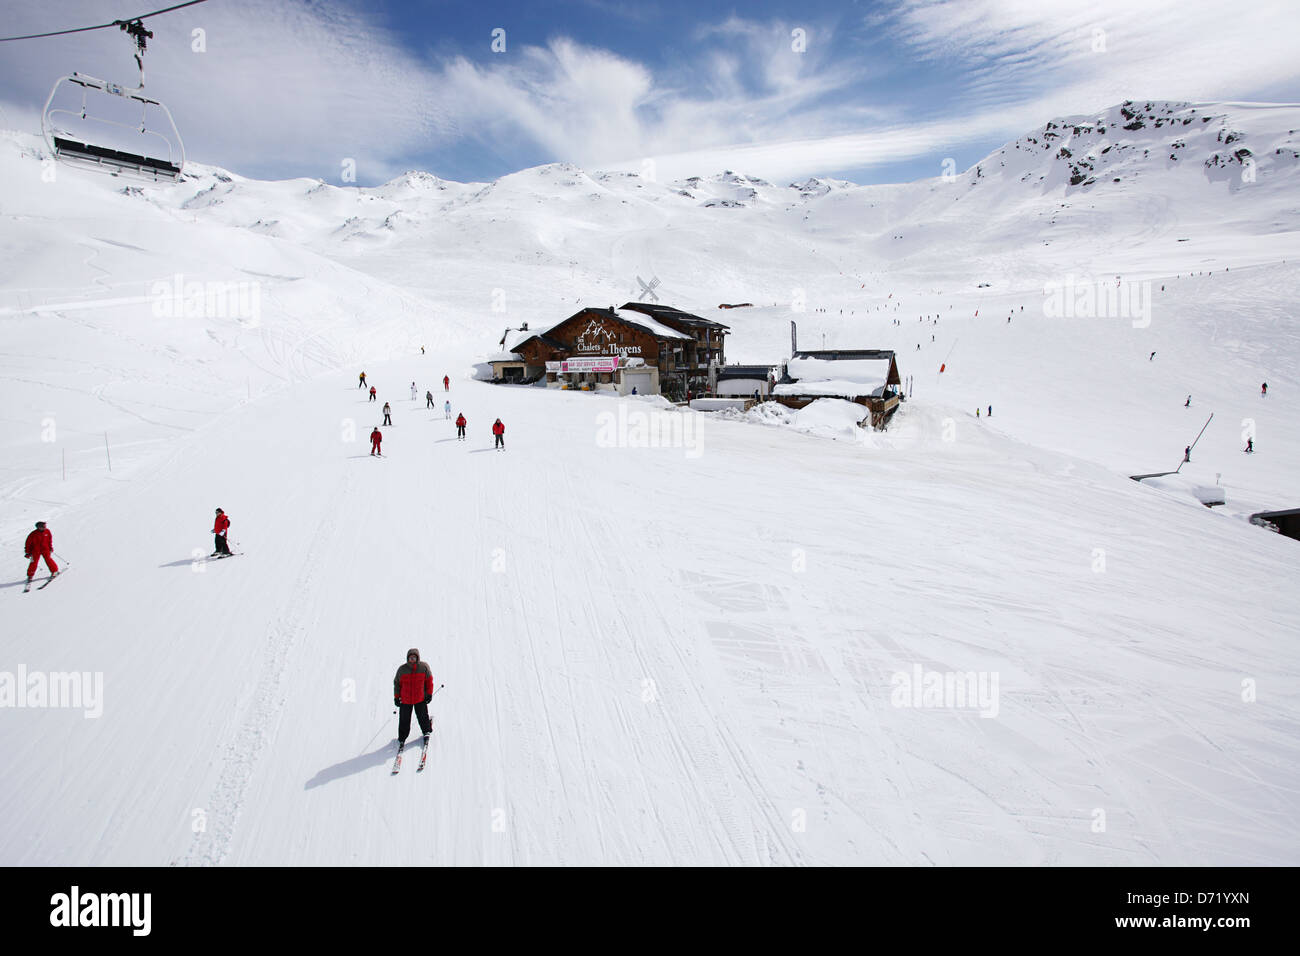 Les Chalets du Thorens with skiers in the foreground & background. Travel type photo from a skiing holiday in the French Alps. Stock Photo